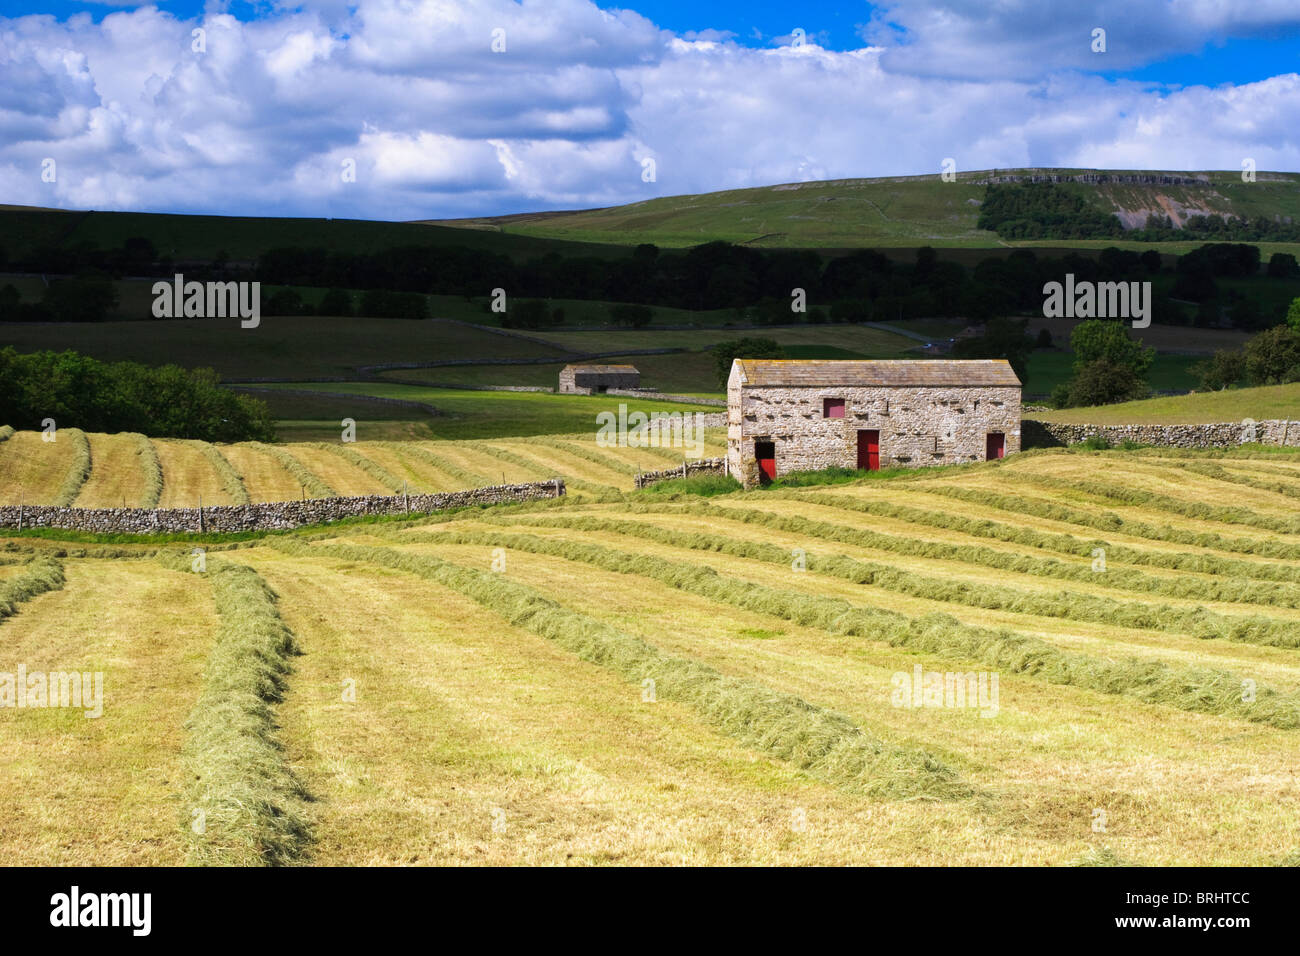 newly mown field in Wensleydale showing single barn with red doors Stock Photo